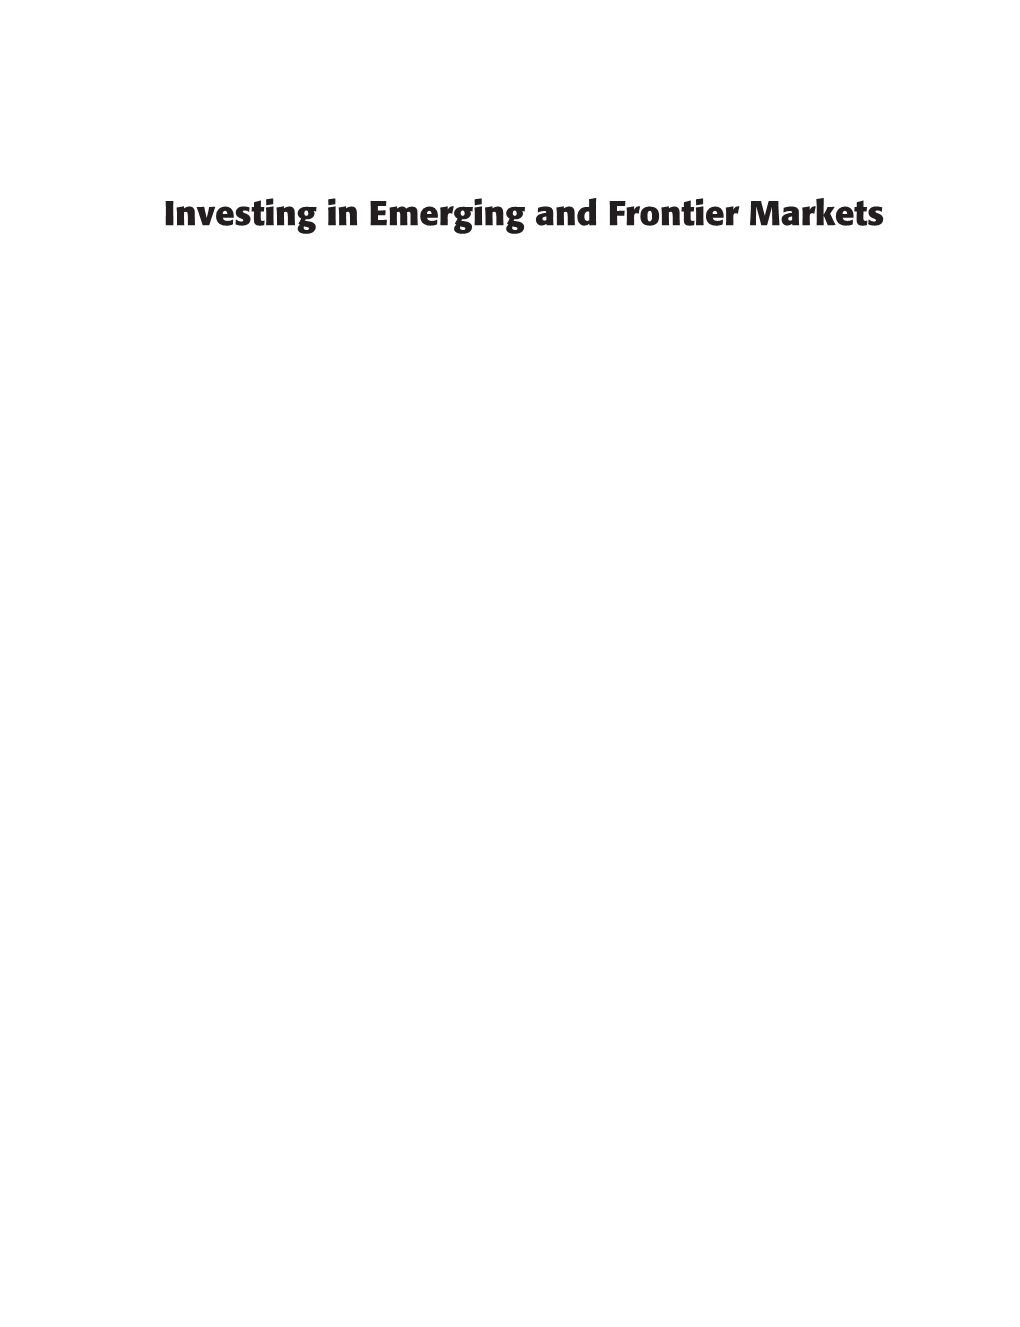 Investing in Emerging and Frontier Markets